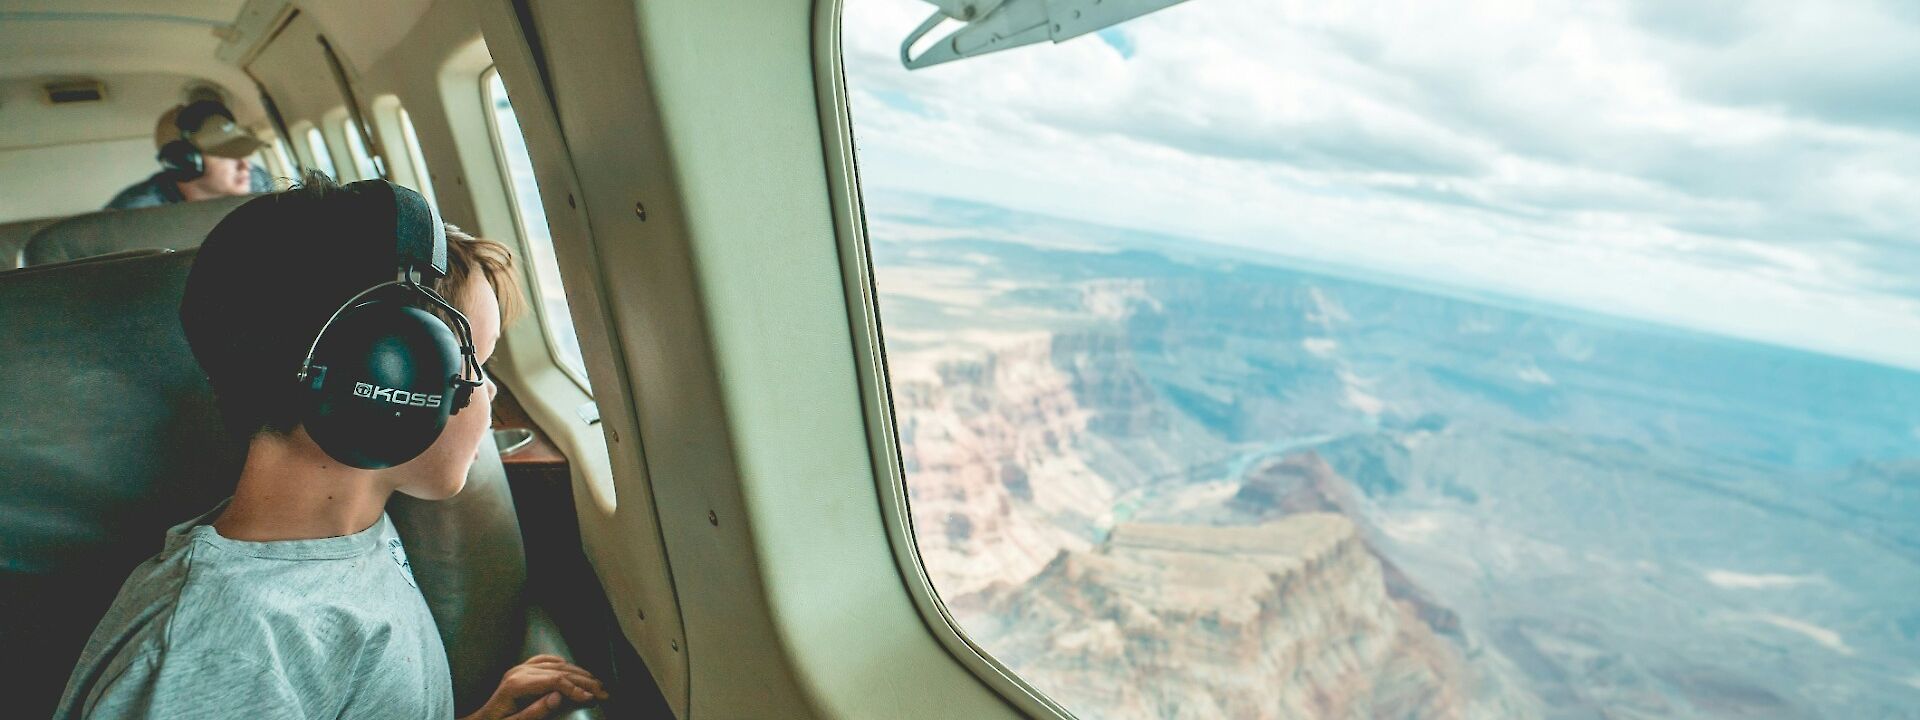 Helicopter tour, Grand Canyon, Arizona, USA. Unsplash: West Wind Air Service